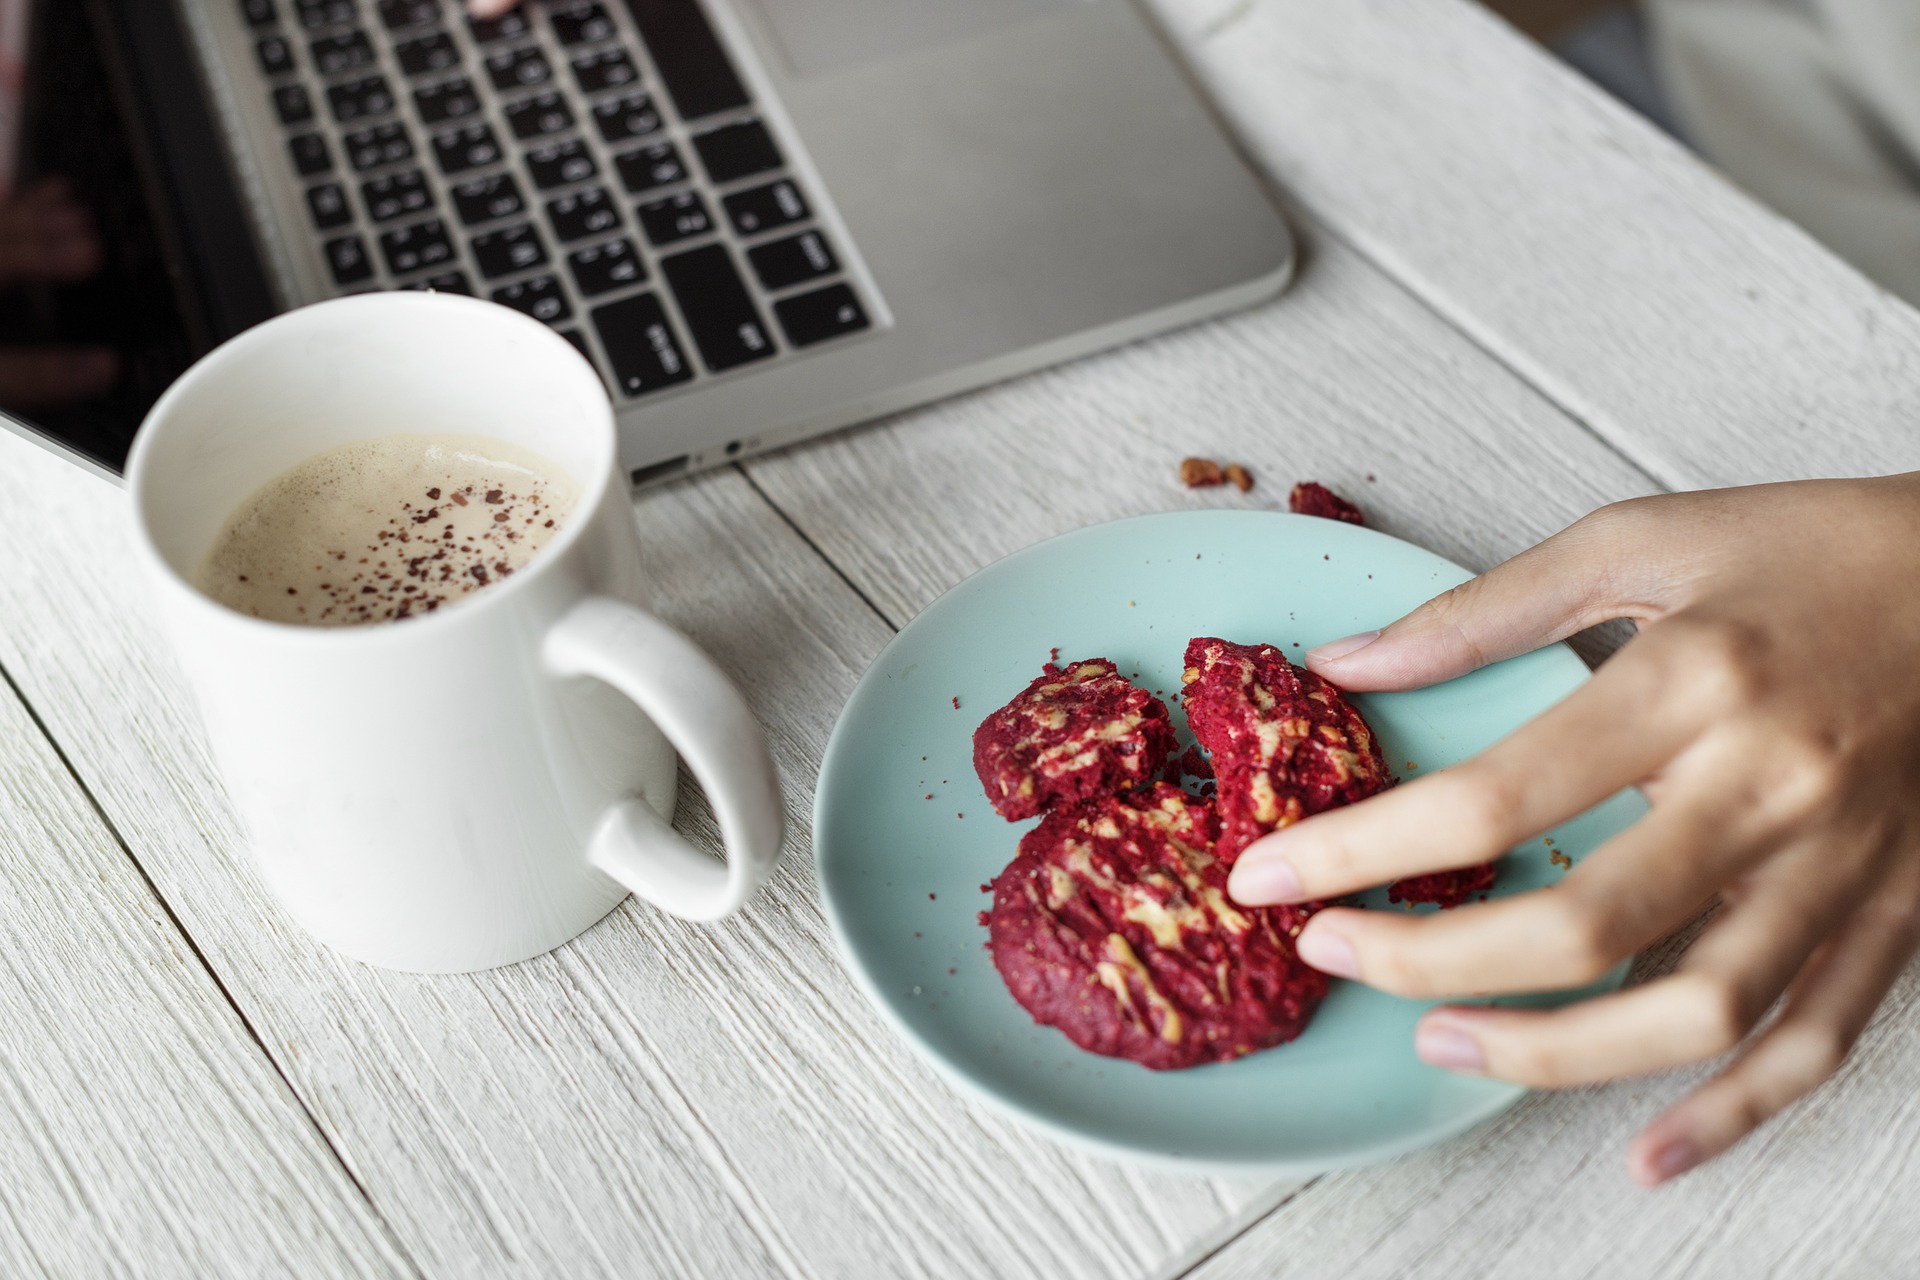 A hand reaching for a cookie on a plate, next to a mug of coffee and a laptop